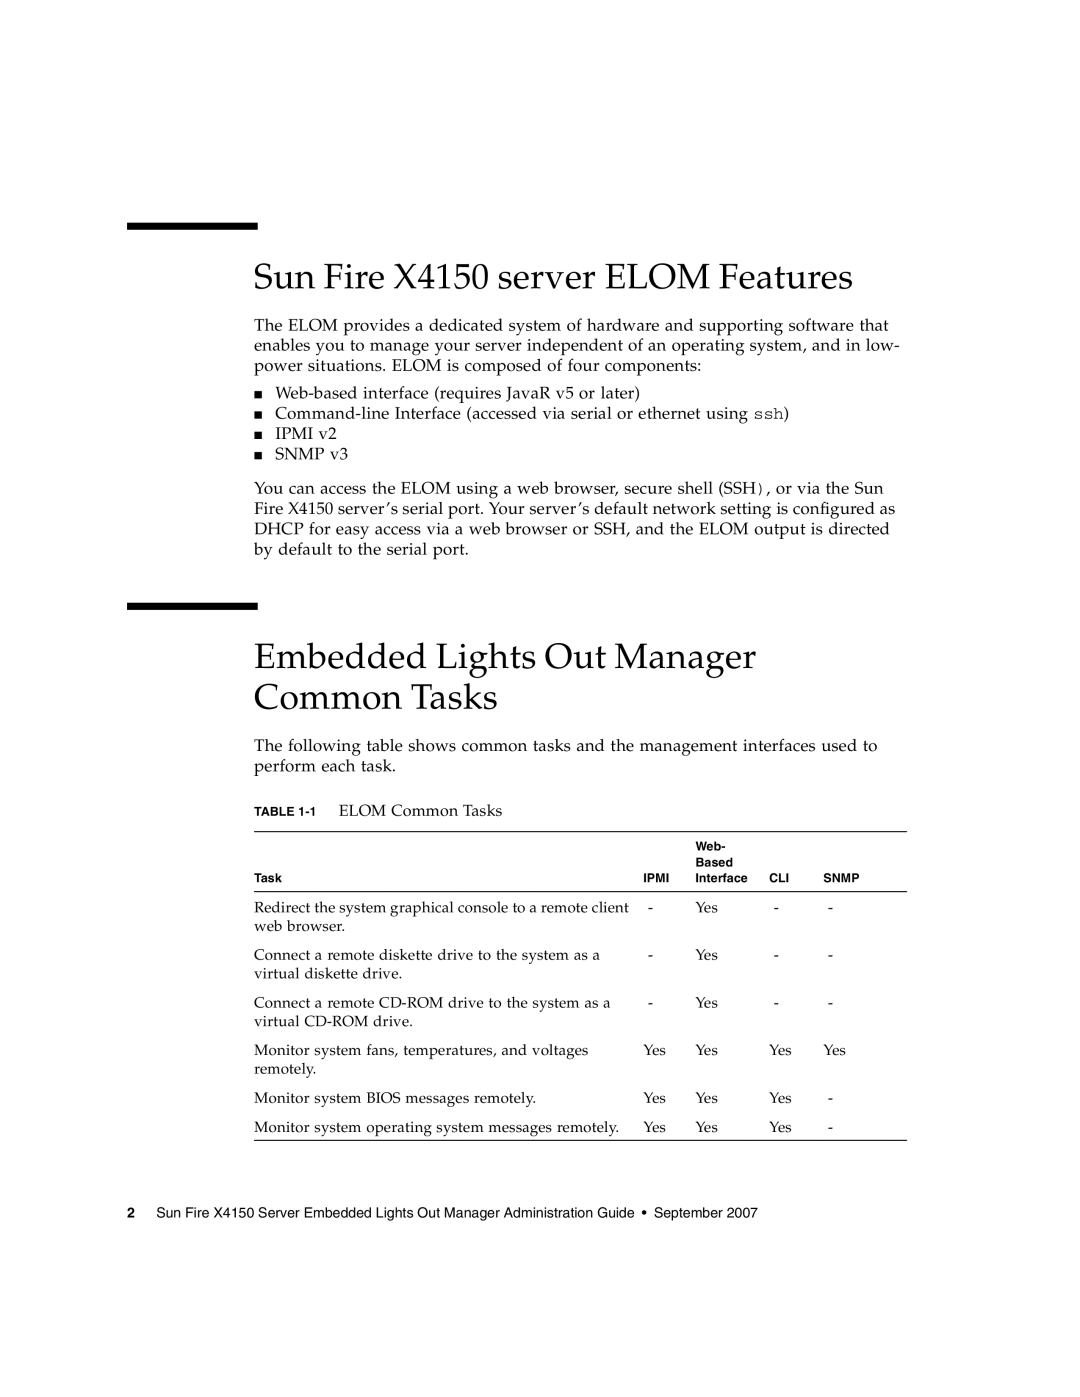 Sun Microsystems manual Sun Fire X4150 server ELOM Features, Embedded Lights Out Manager Common Tasks 